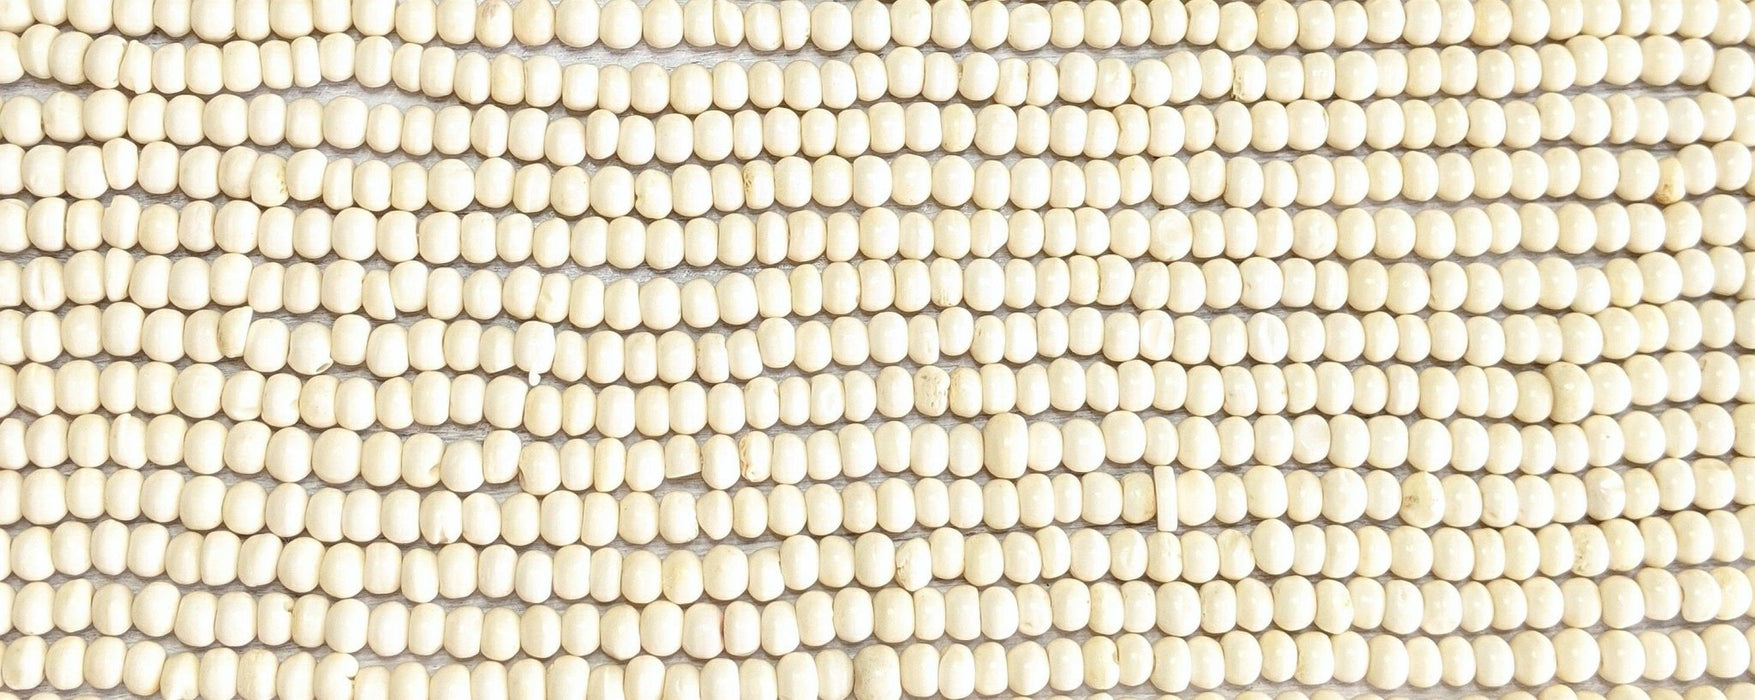 6x4mm Off White Water Buffalo Bone Rondelle Beads - 15 Inch Stand (AW31) - Beads and Babble